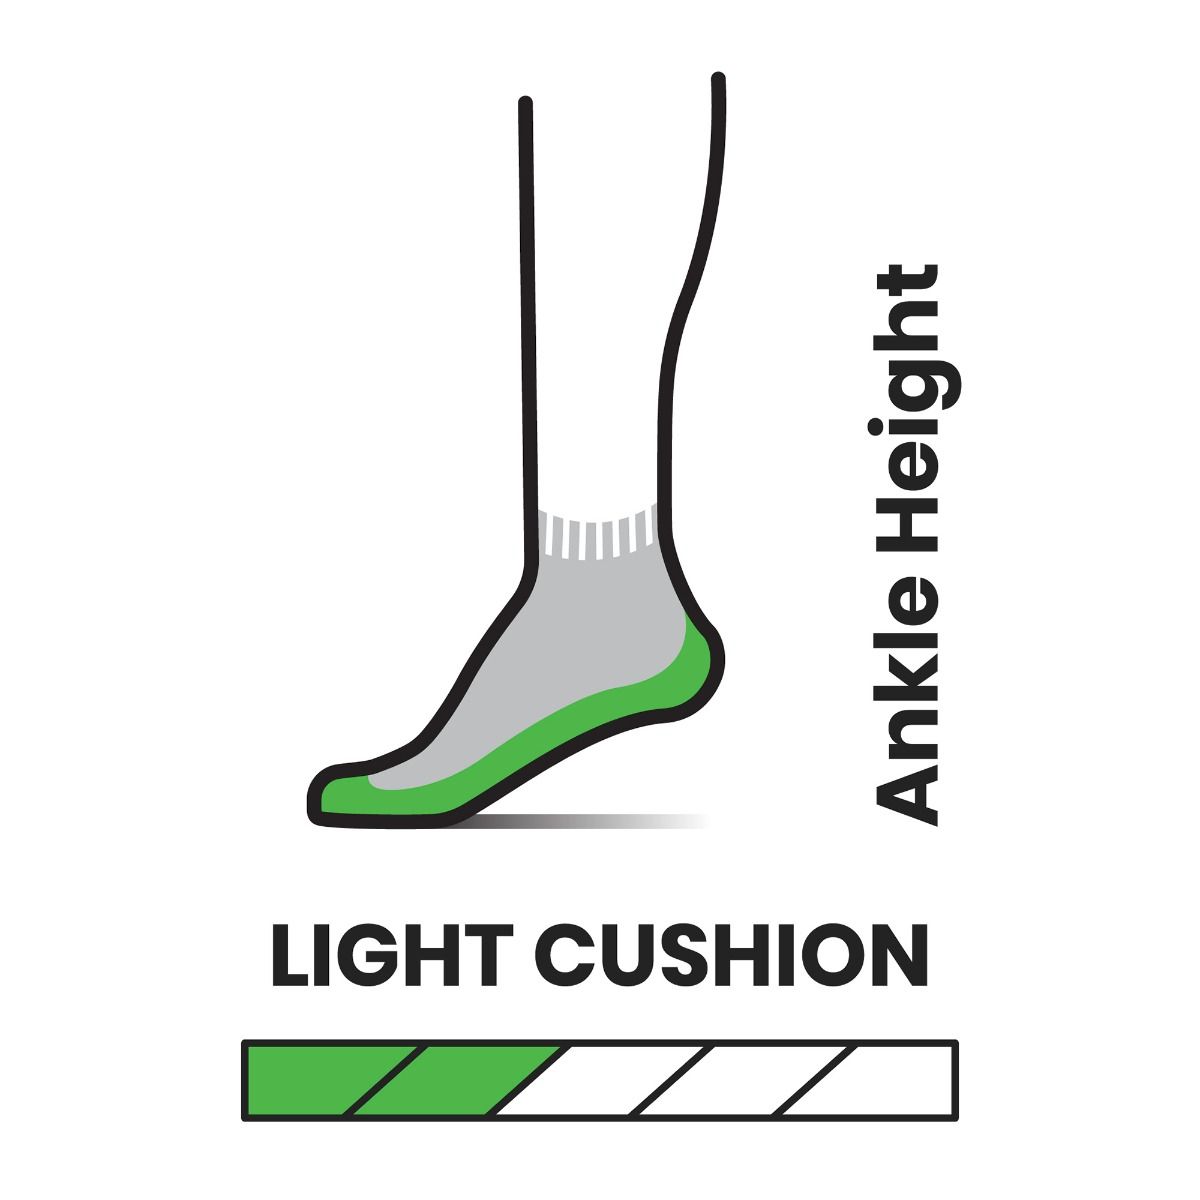 Smartwool Hike Low Cushion Ankle Sock